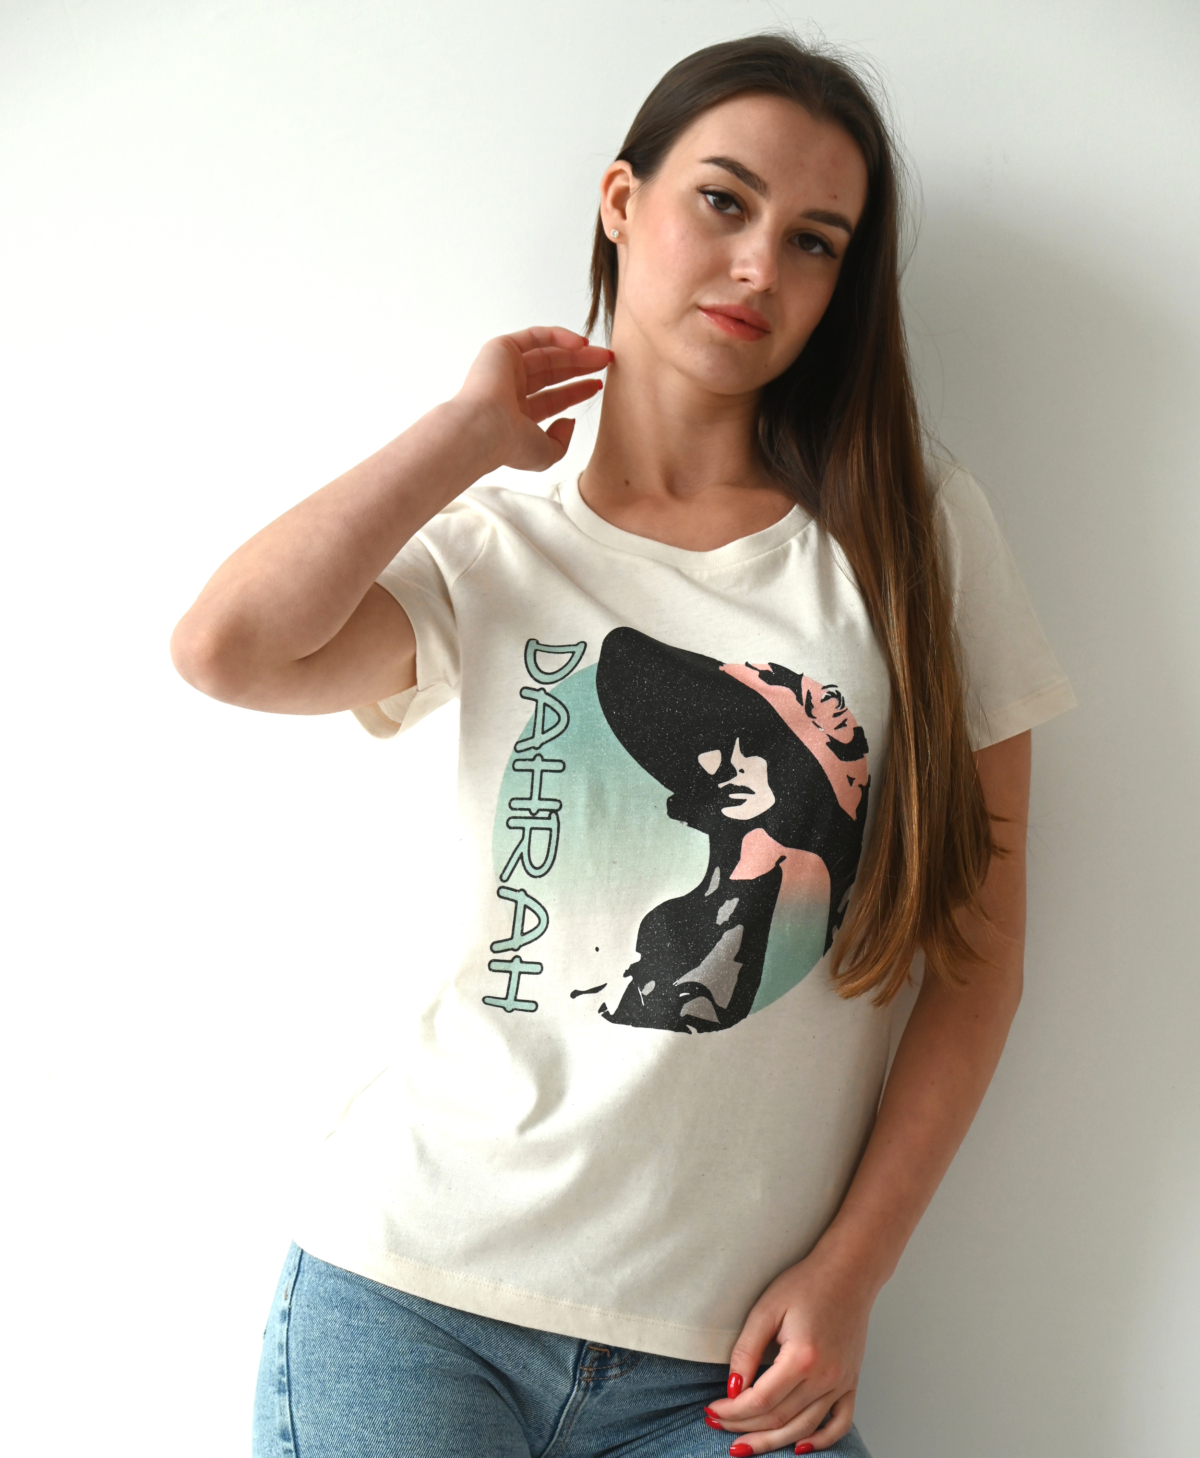 Organic cotton T-shirt with print of a beautiful confident lady with hat by Dahrah Darah Fashion.